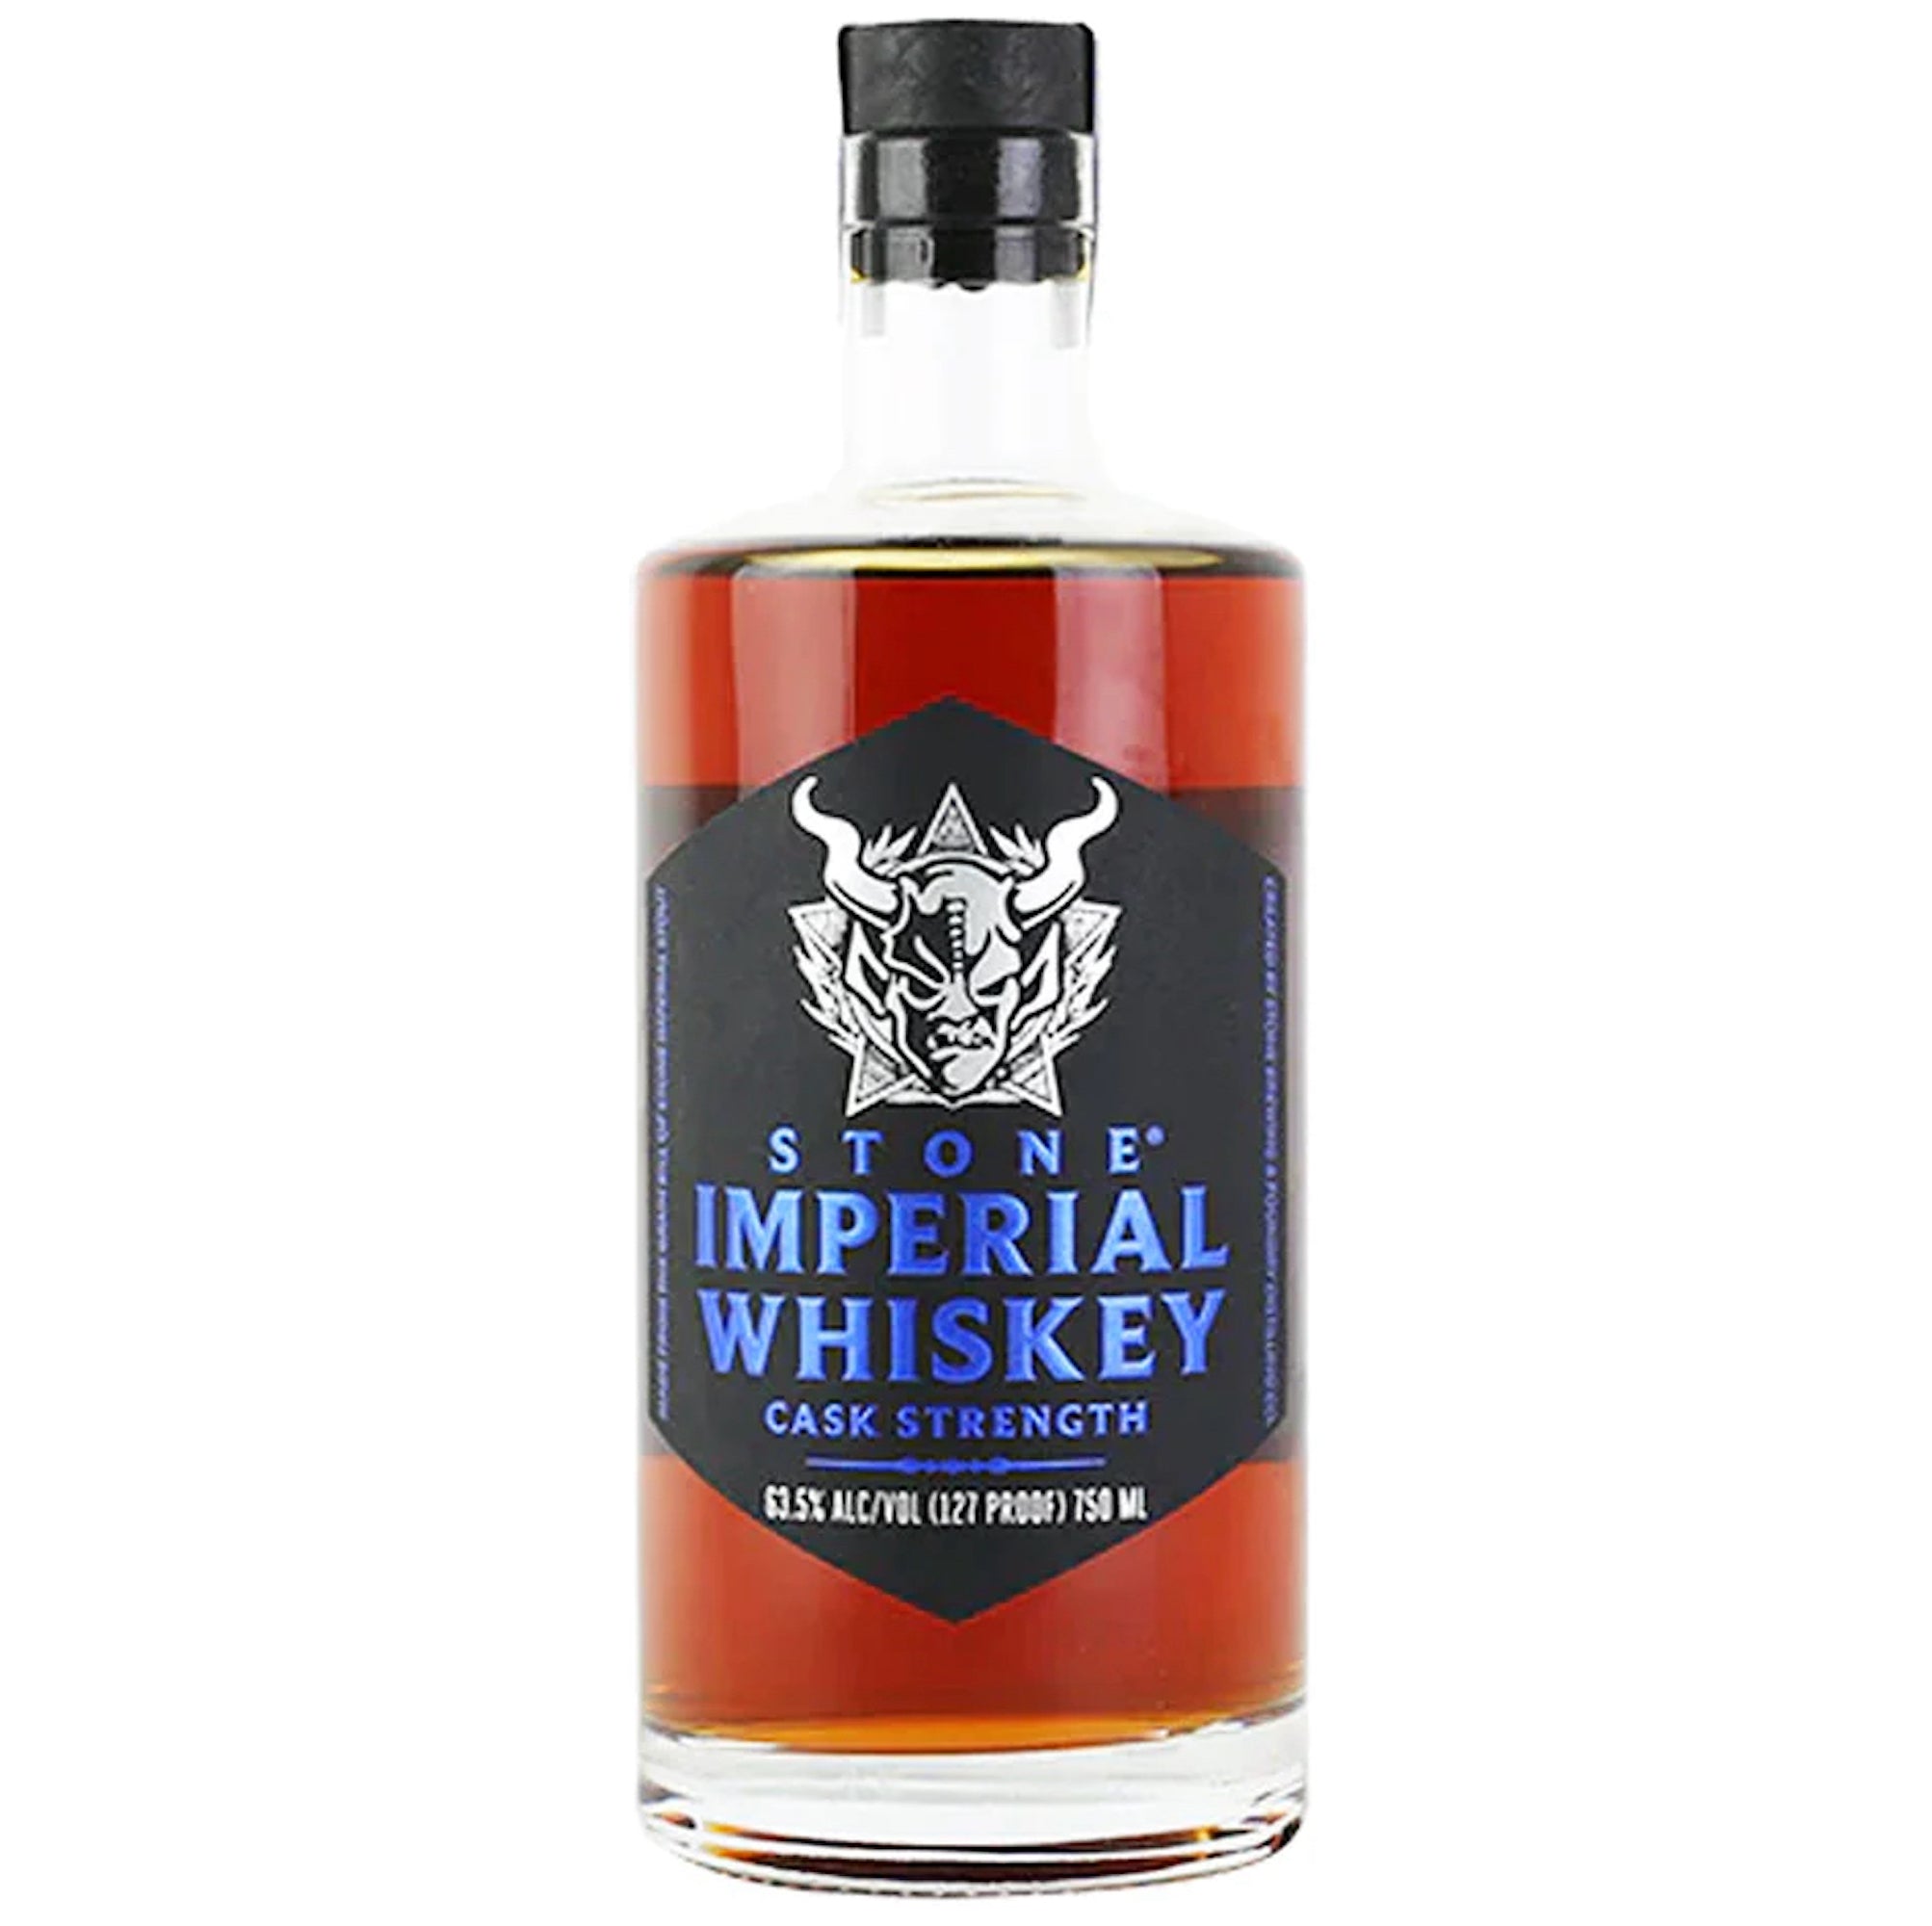 Stone Imperial Whiskey (Cask Strength)